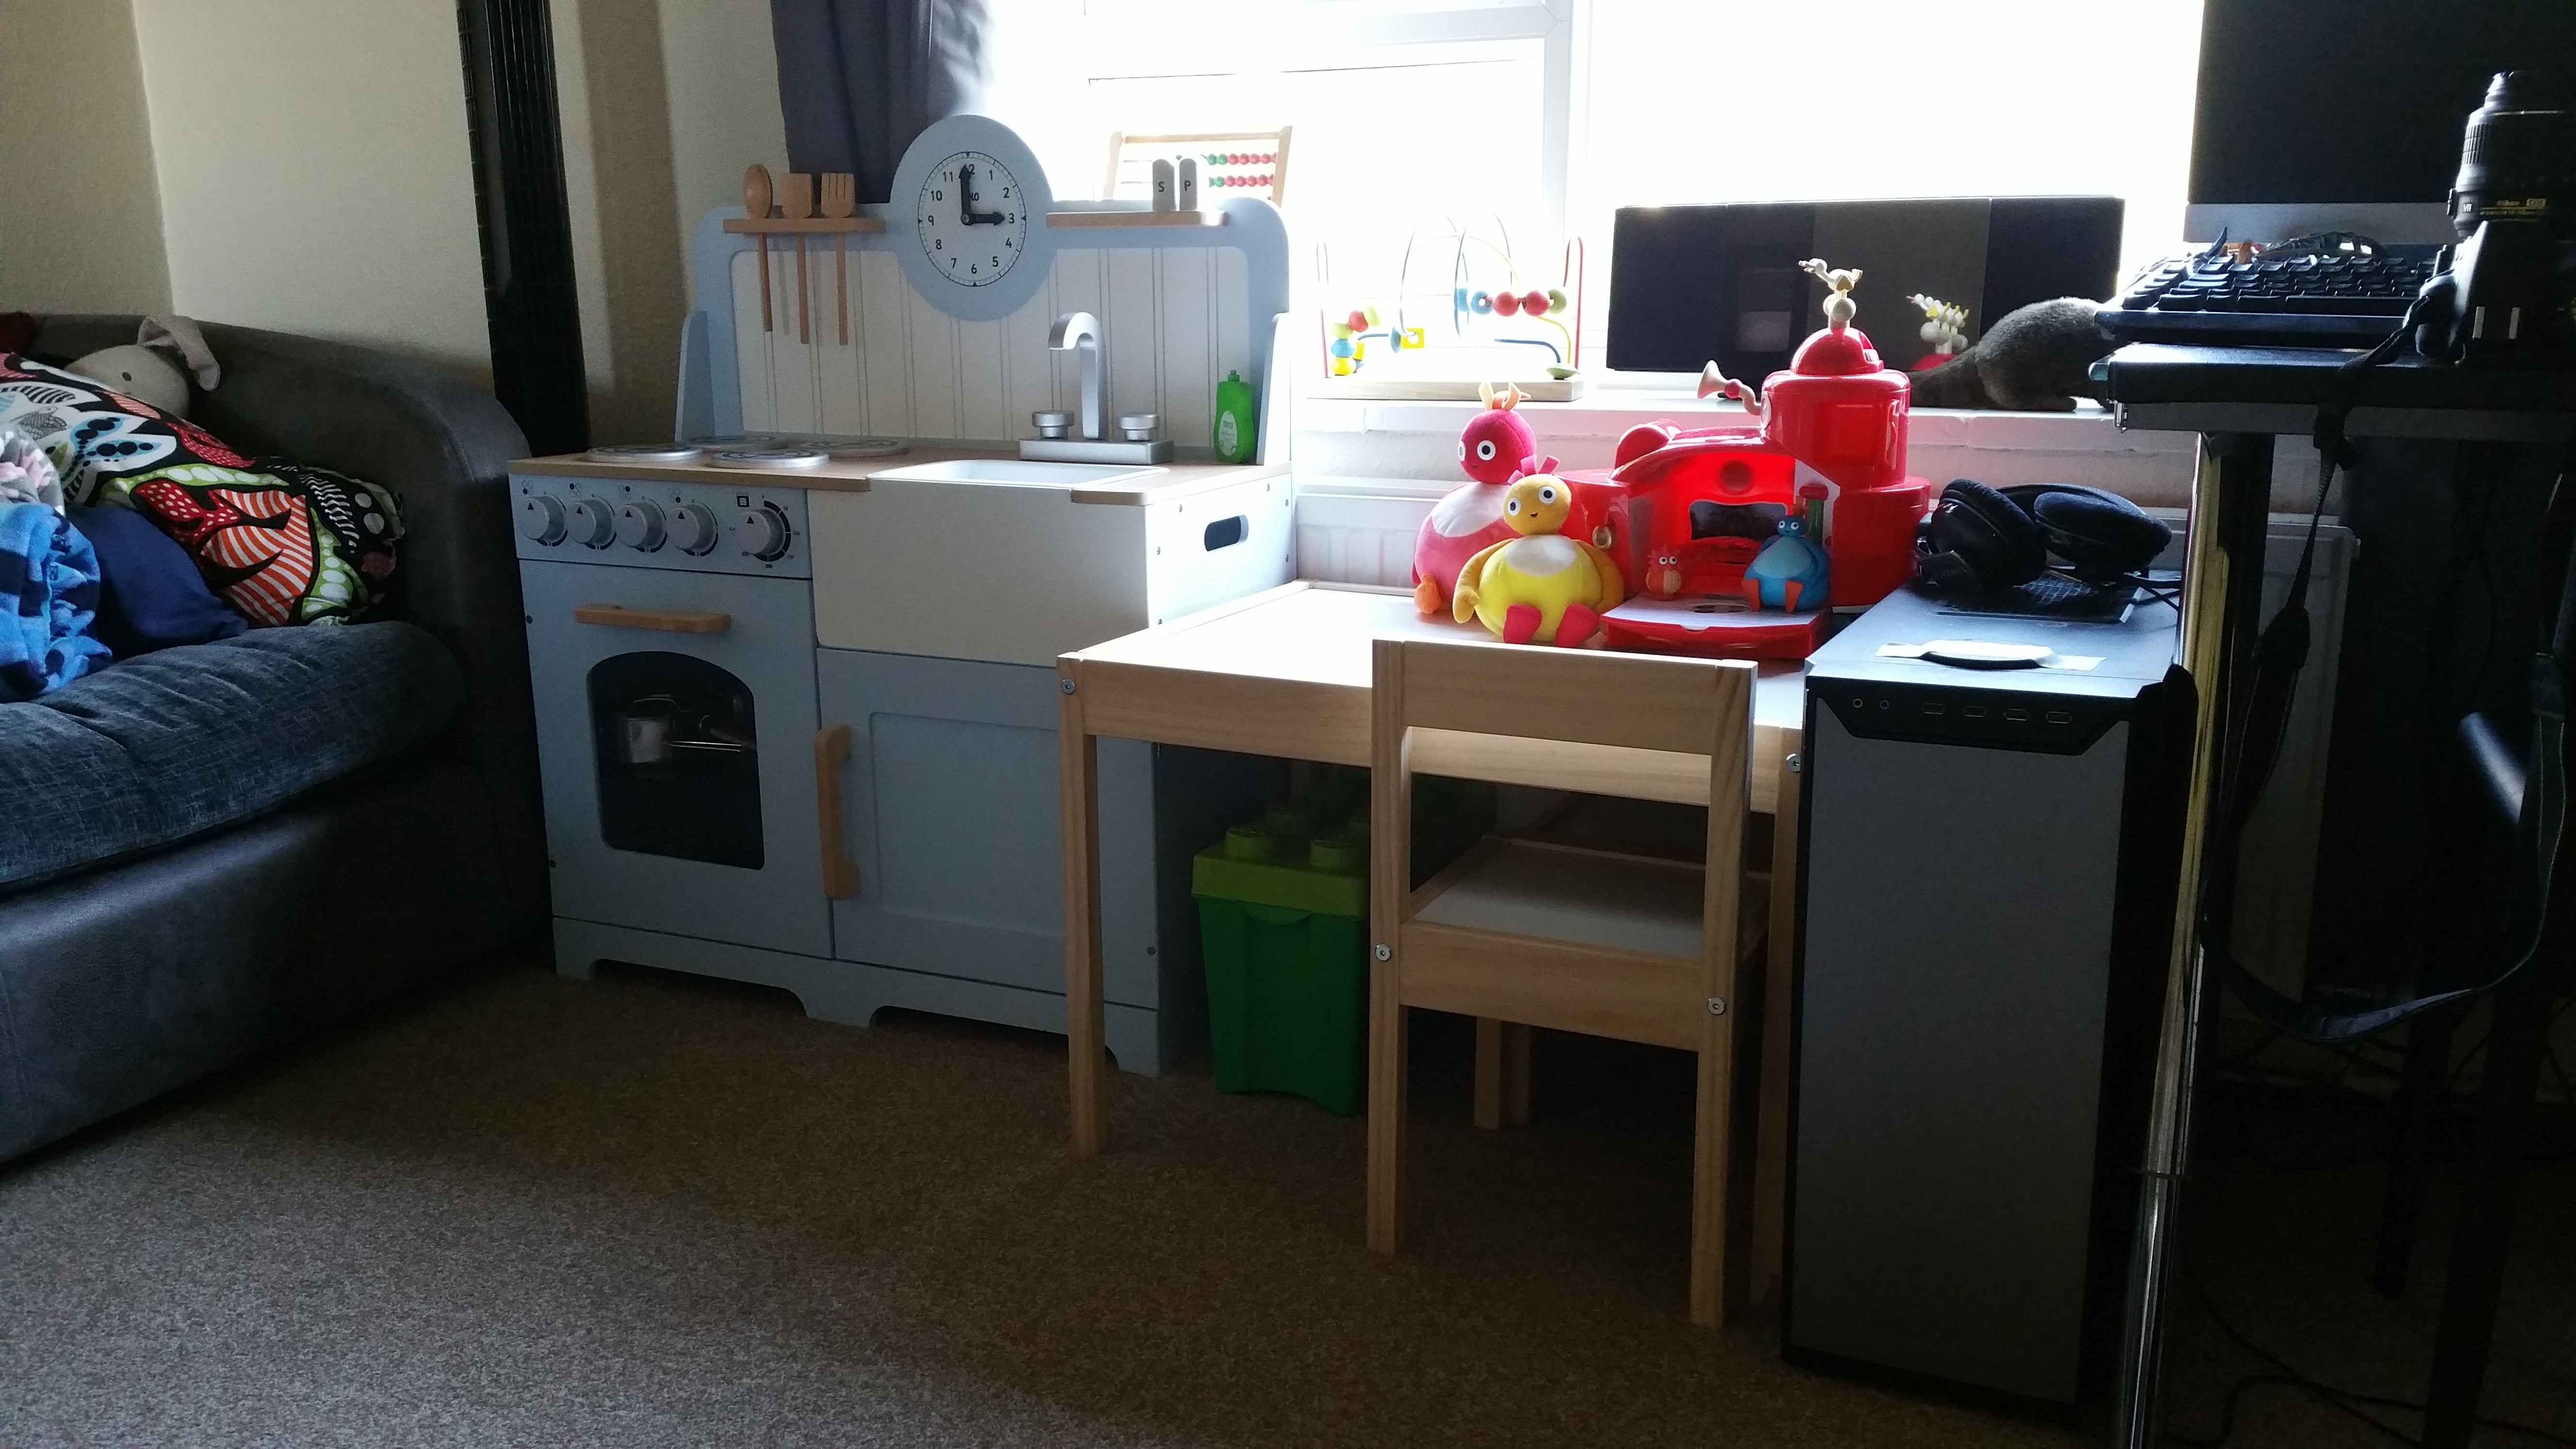 tidlo wooden country play kitchen